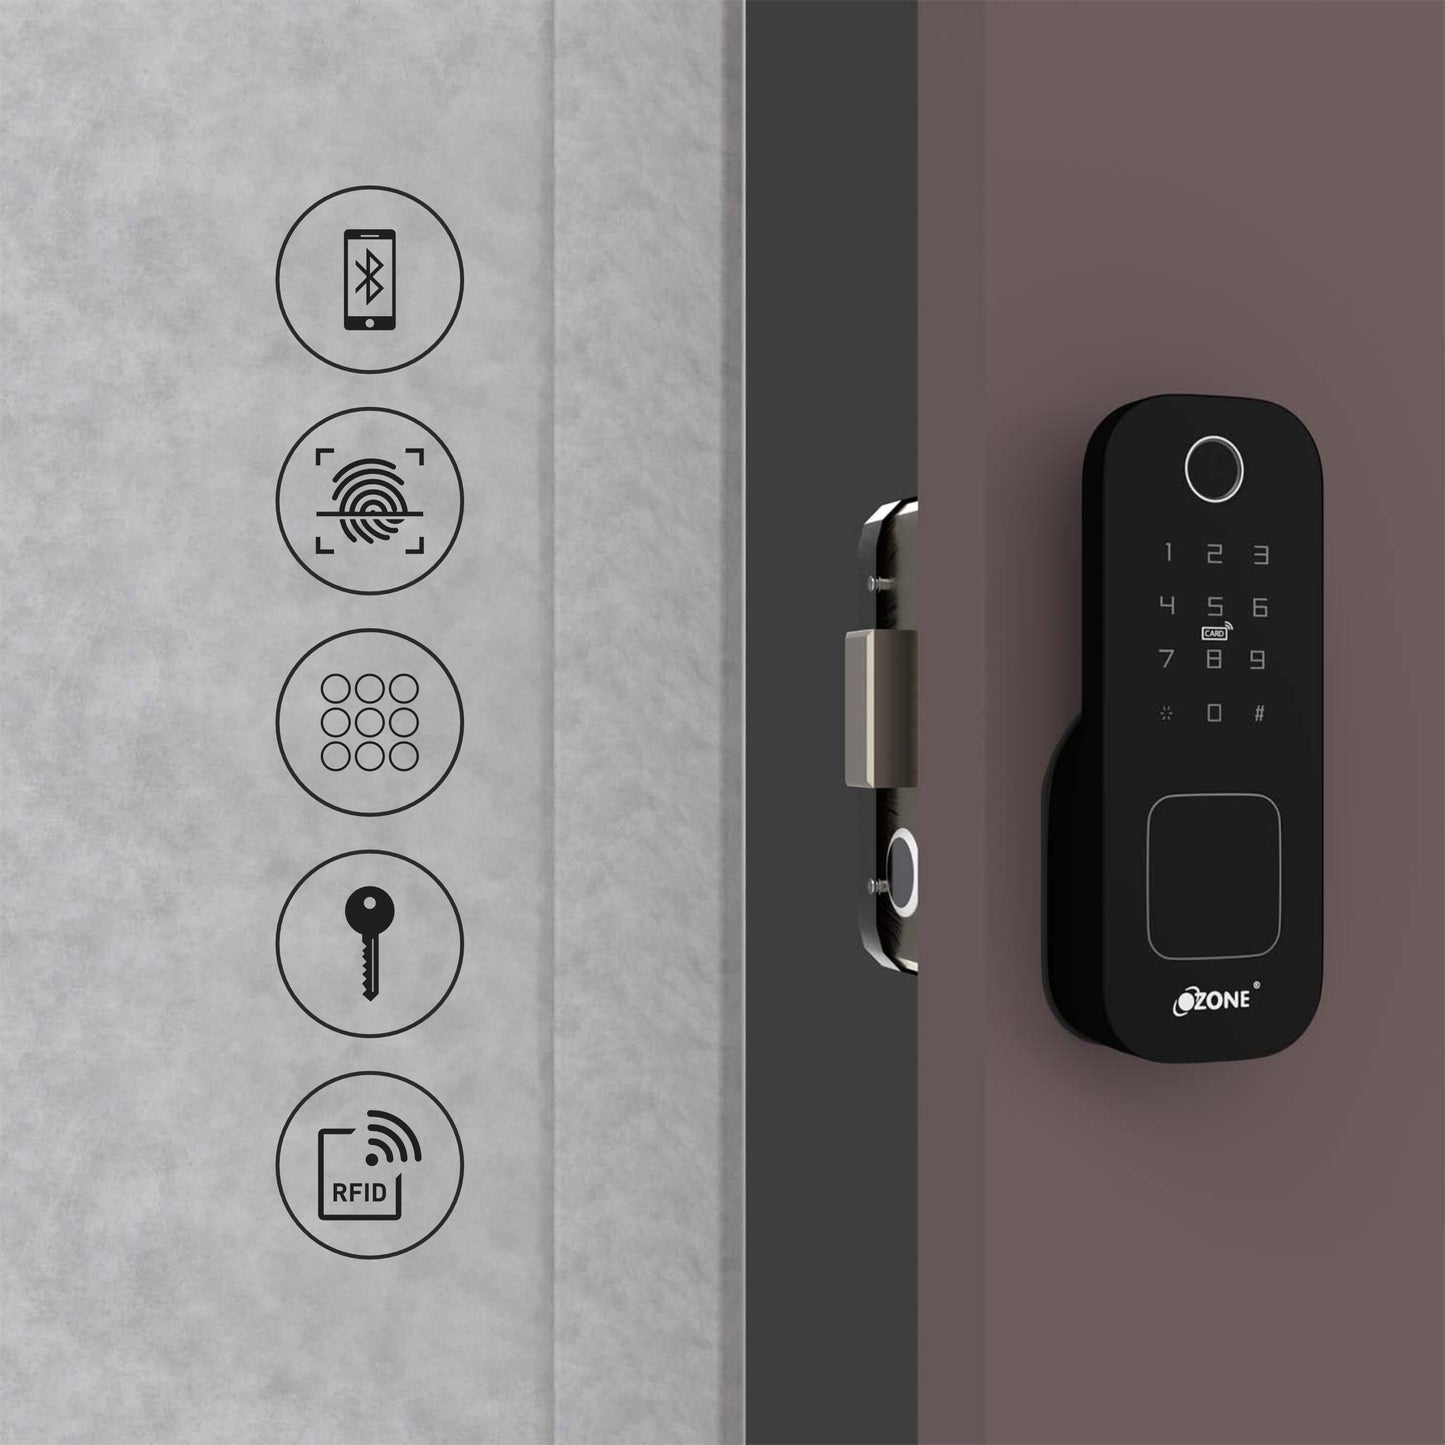 Ozone Cleo Life Wi-Fi Smart Lock with 5-way access | Door Thickness: 20-65 mm